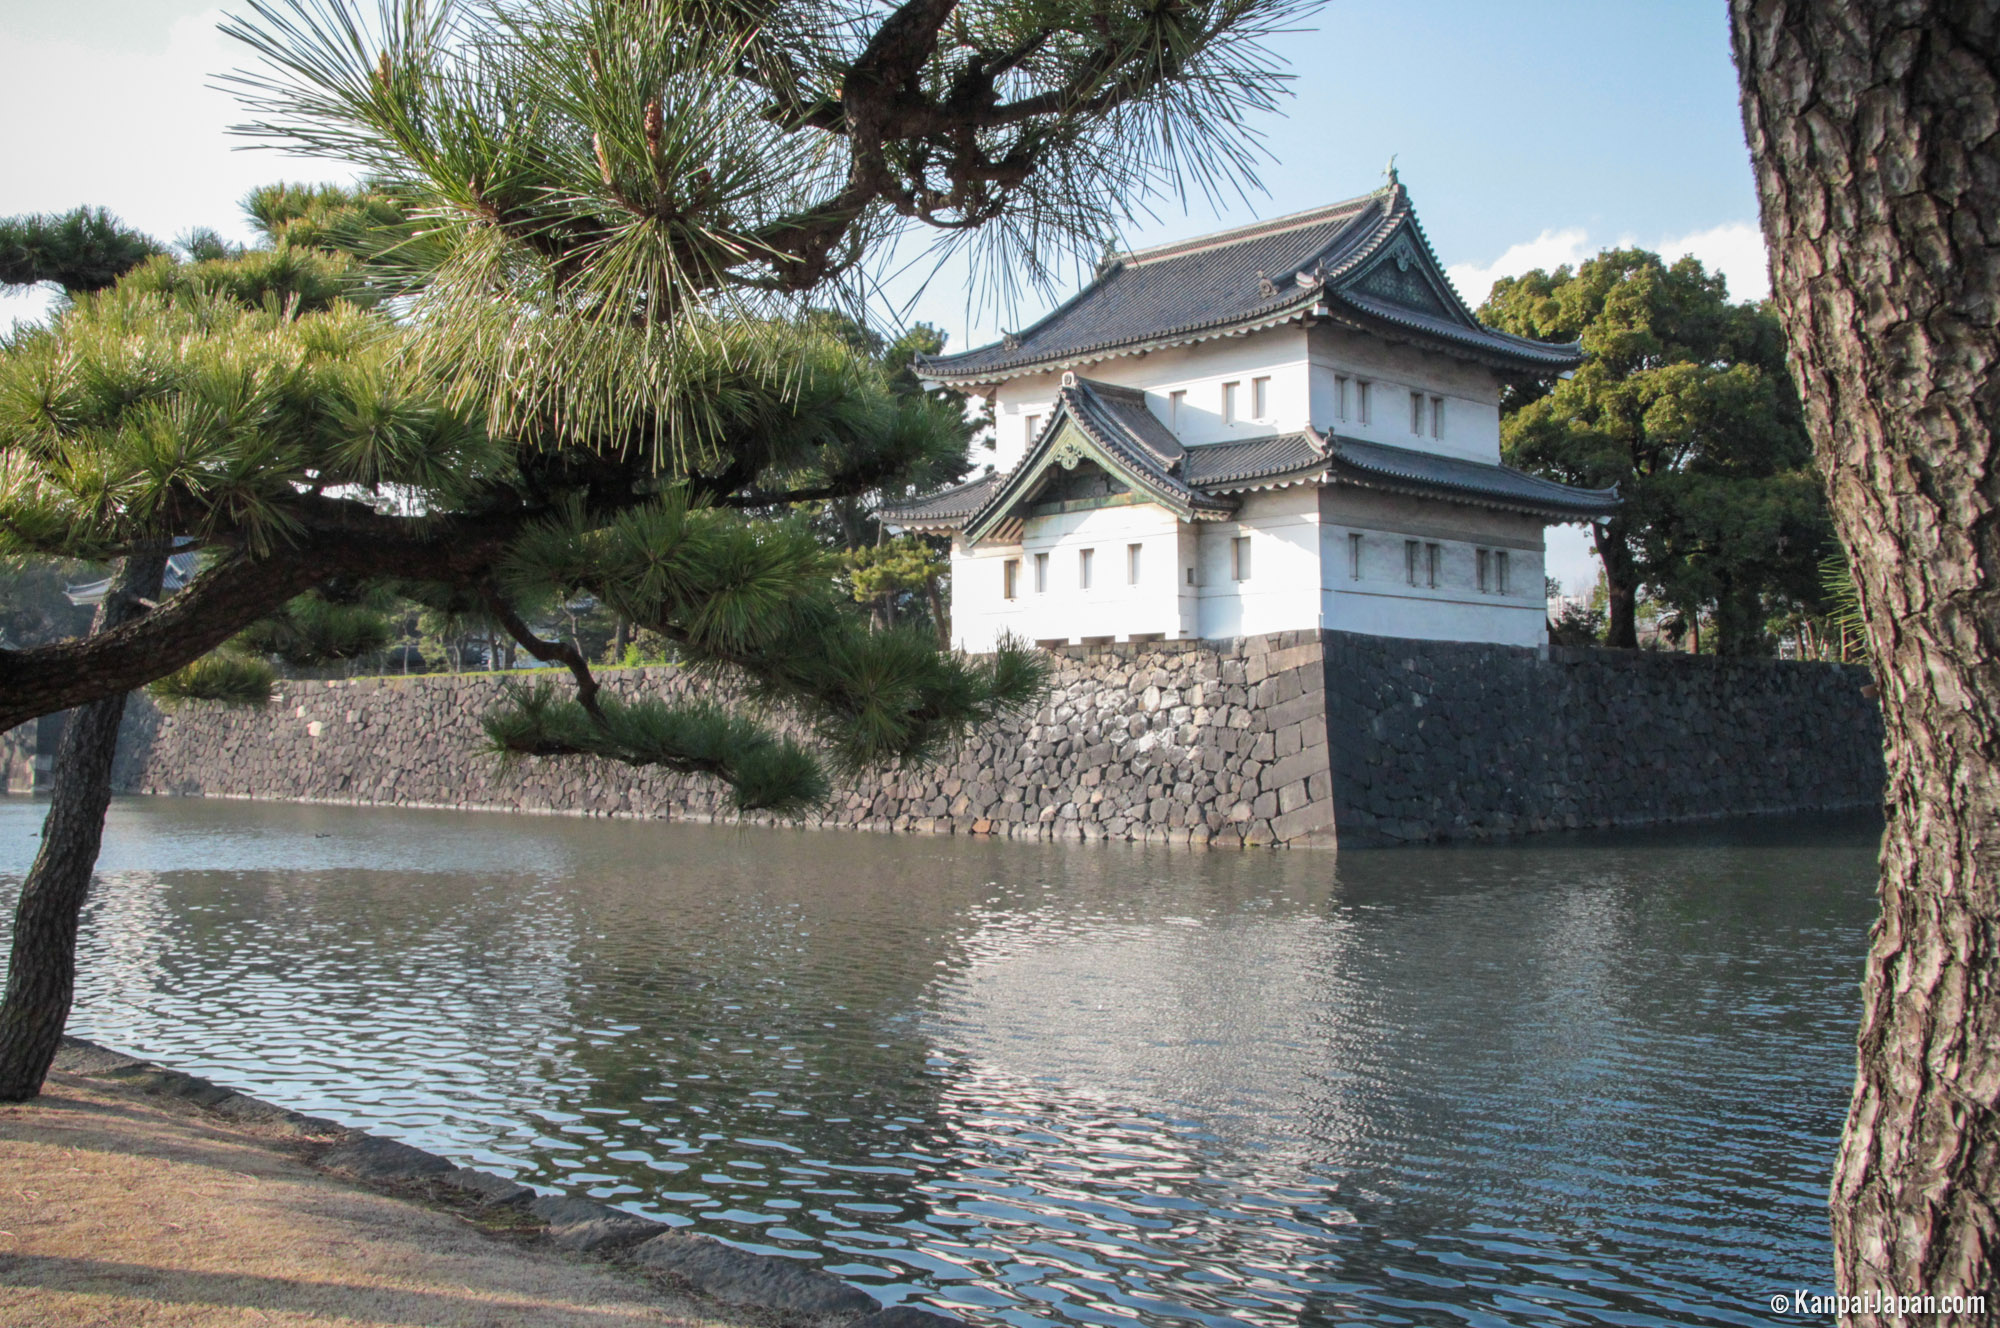 Amazing Tokyo Imperial Palace Pictures & Backgrounds